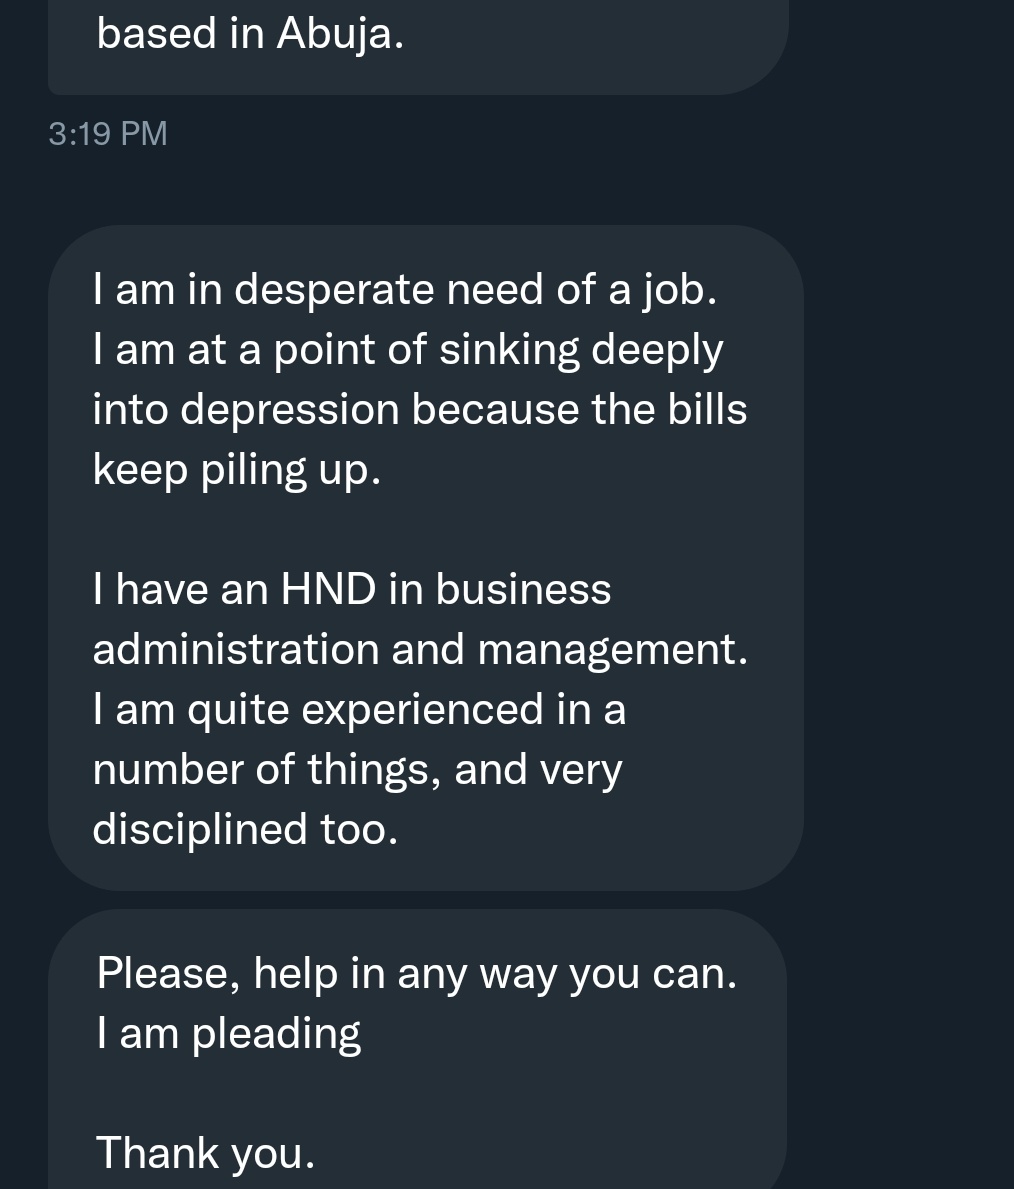 Hello 👋  #AbujaTwitterCommunity 

Kindly reach out to us if you can help. 

Thank you. 

#Abuja #abujajobs